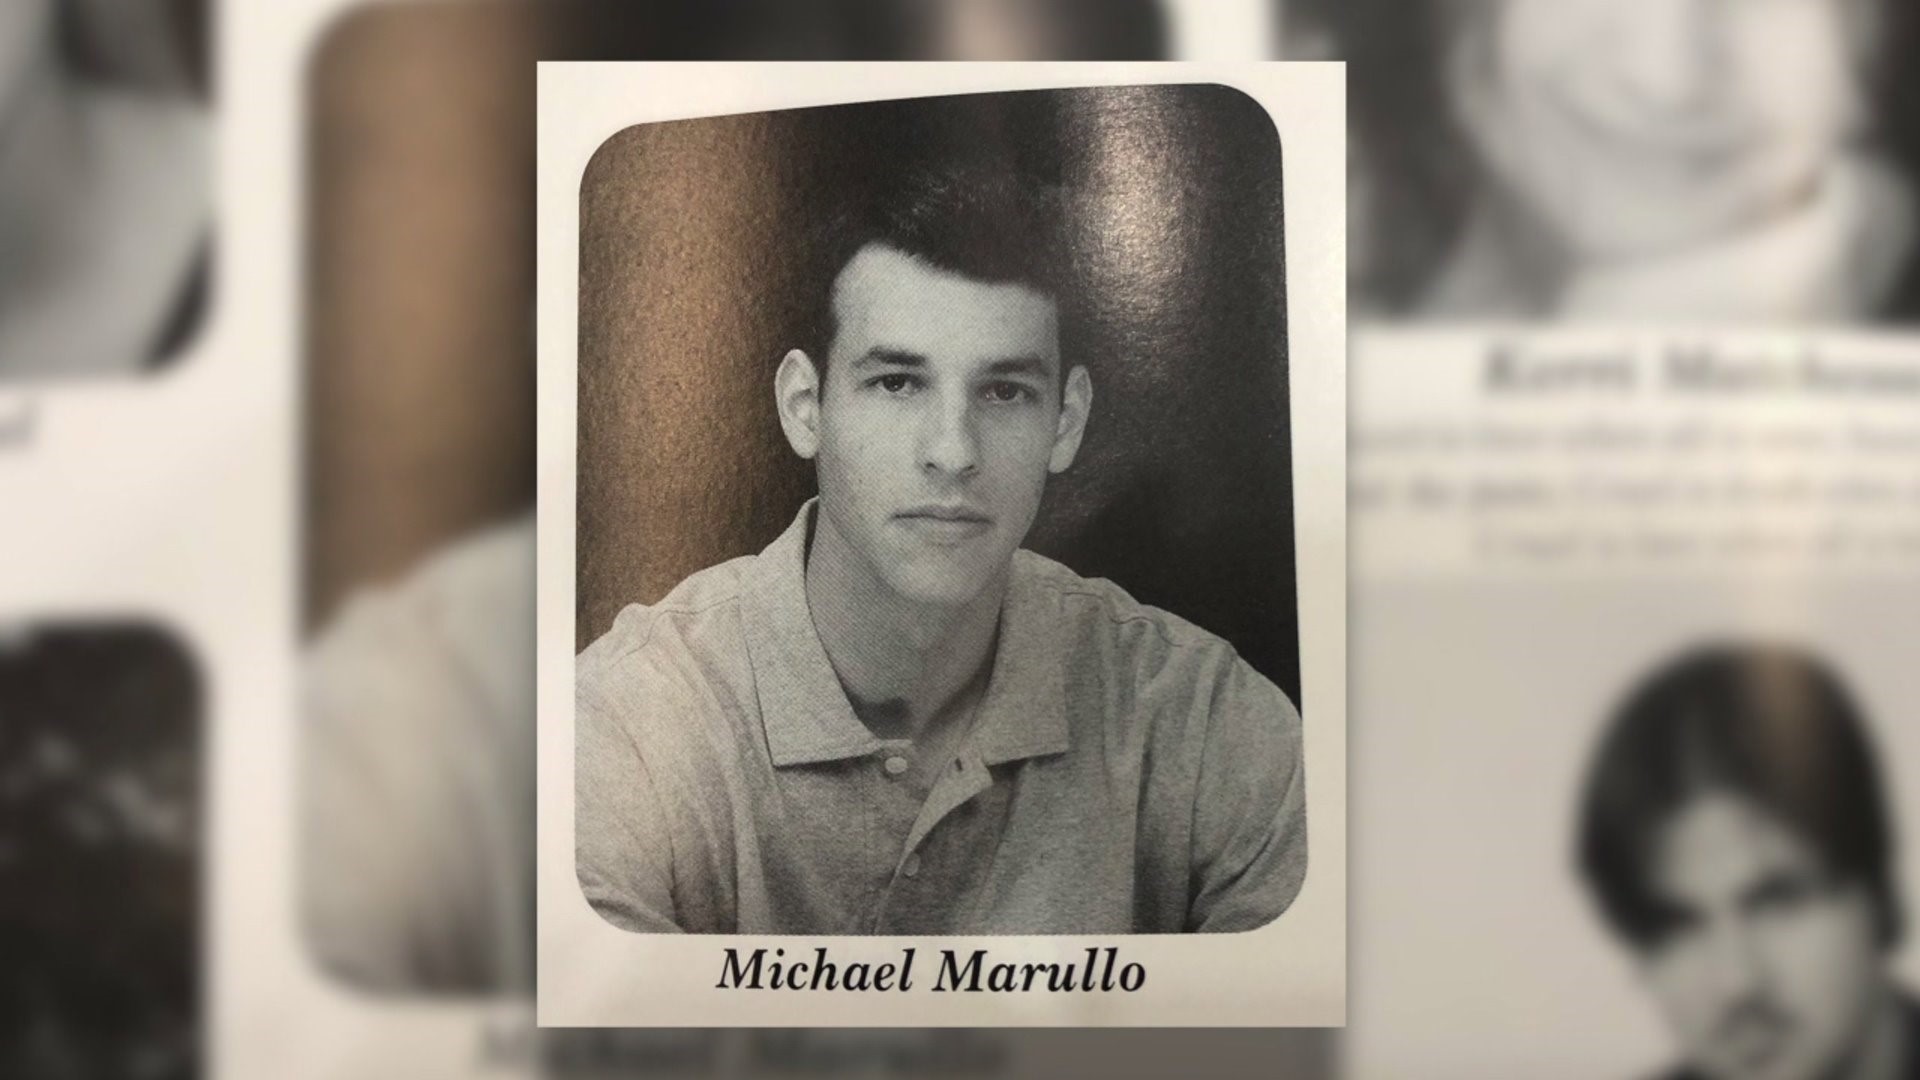 Mike Marullo allegedly shot two police officers in Baltimore before he was killed by gunfire.